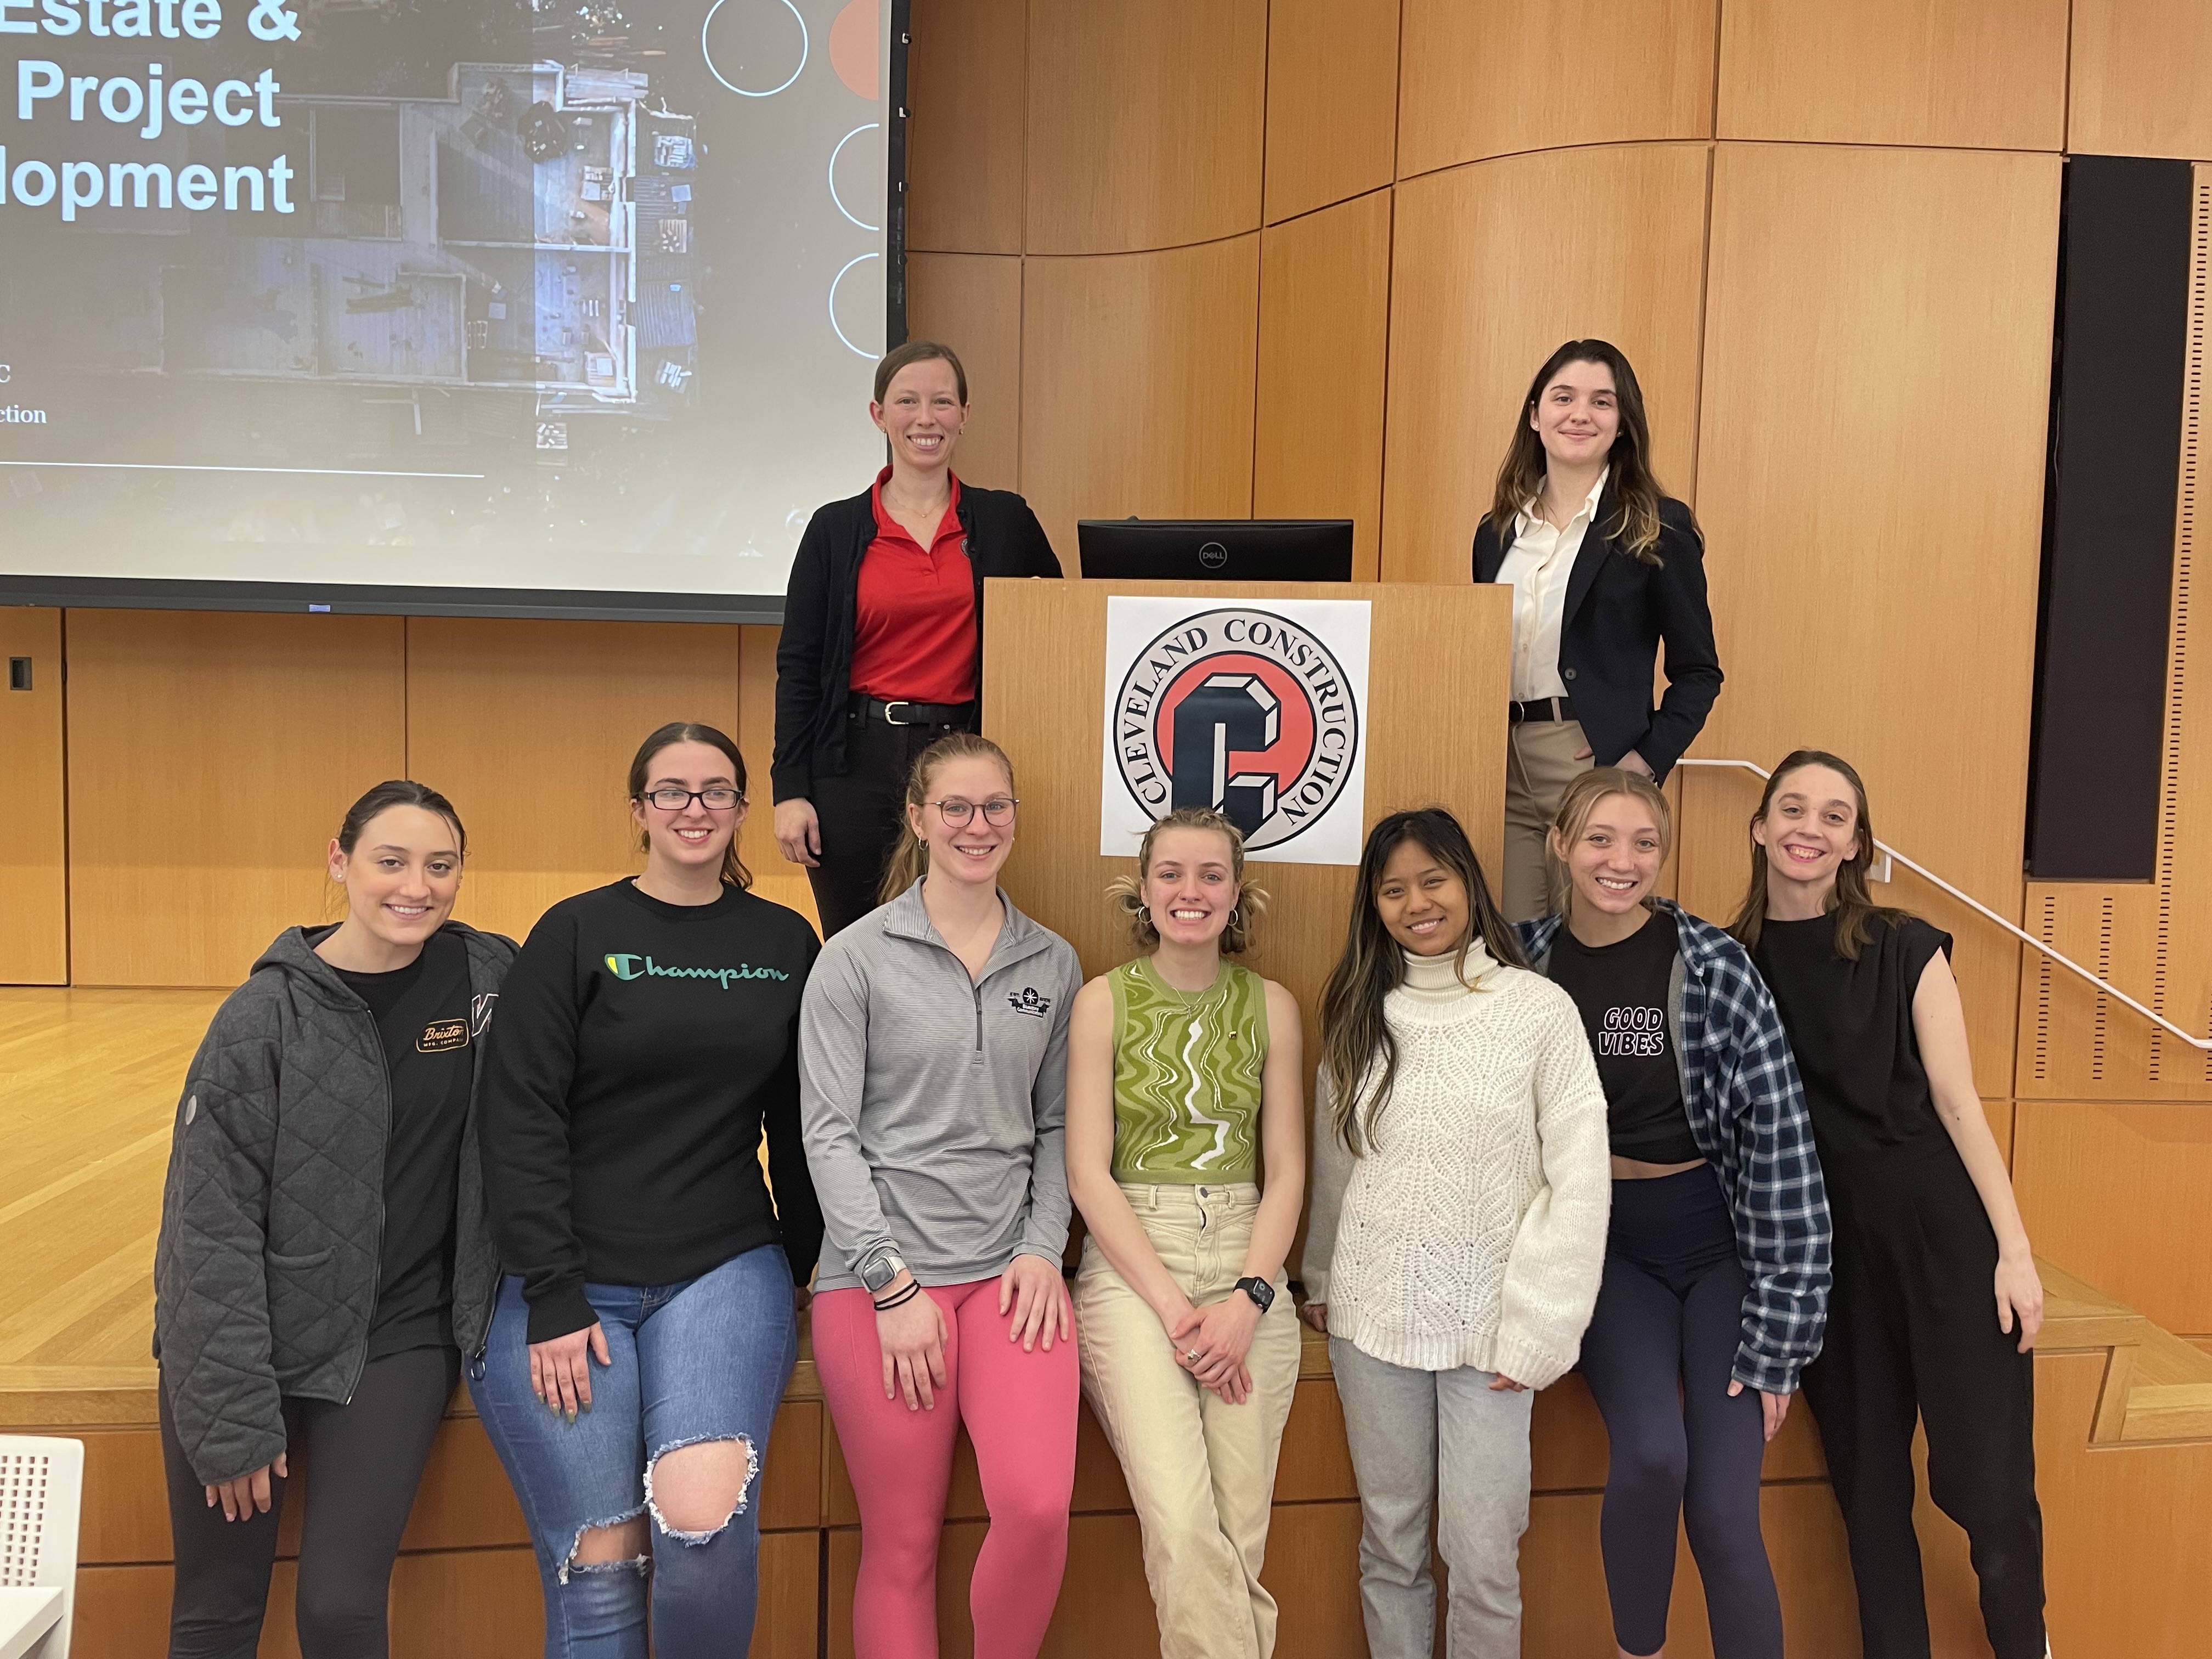 Cleveland Construction's Riley Small Inspires Next Generation of Women in Construction at Kent State University